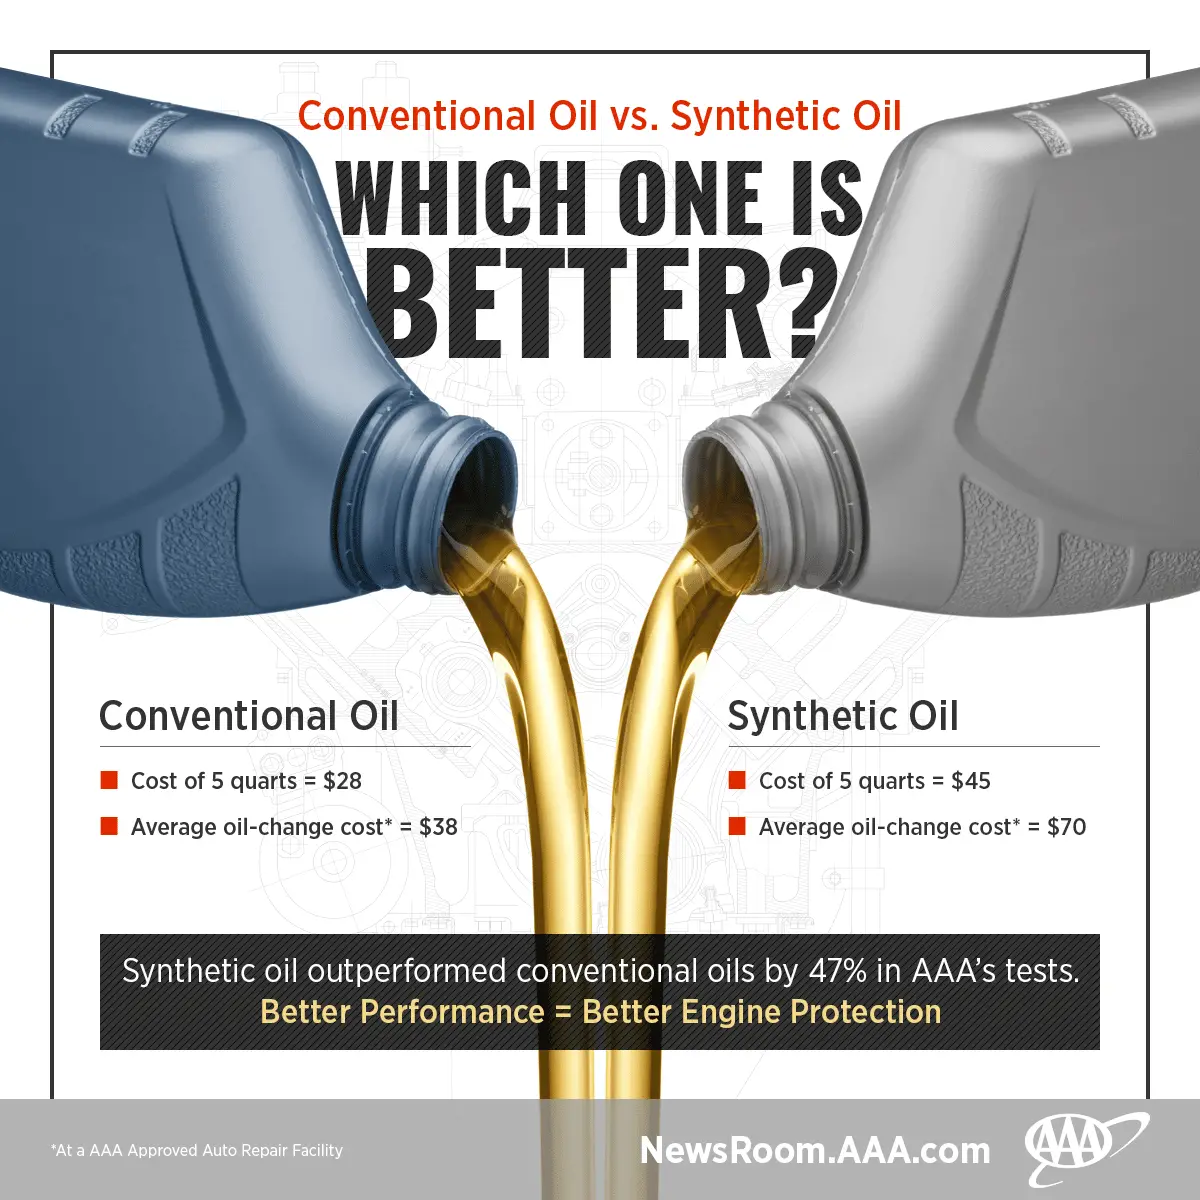 AAA Study Confirms Synthetic Oil is Better Than the Conventional Stuff